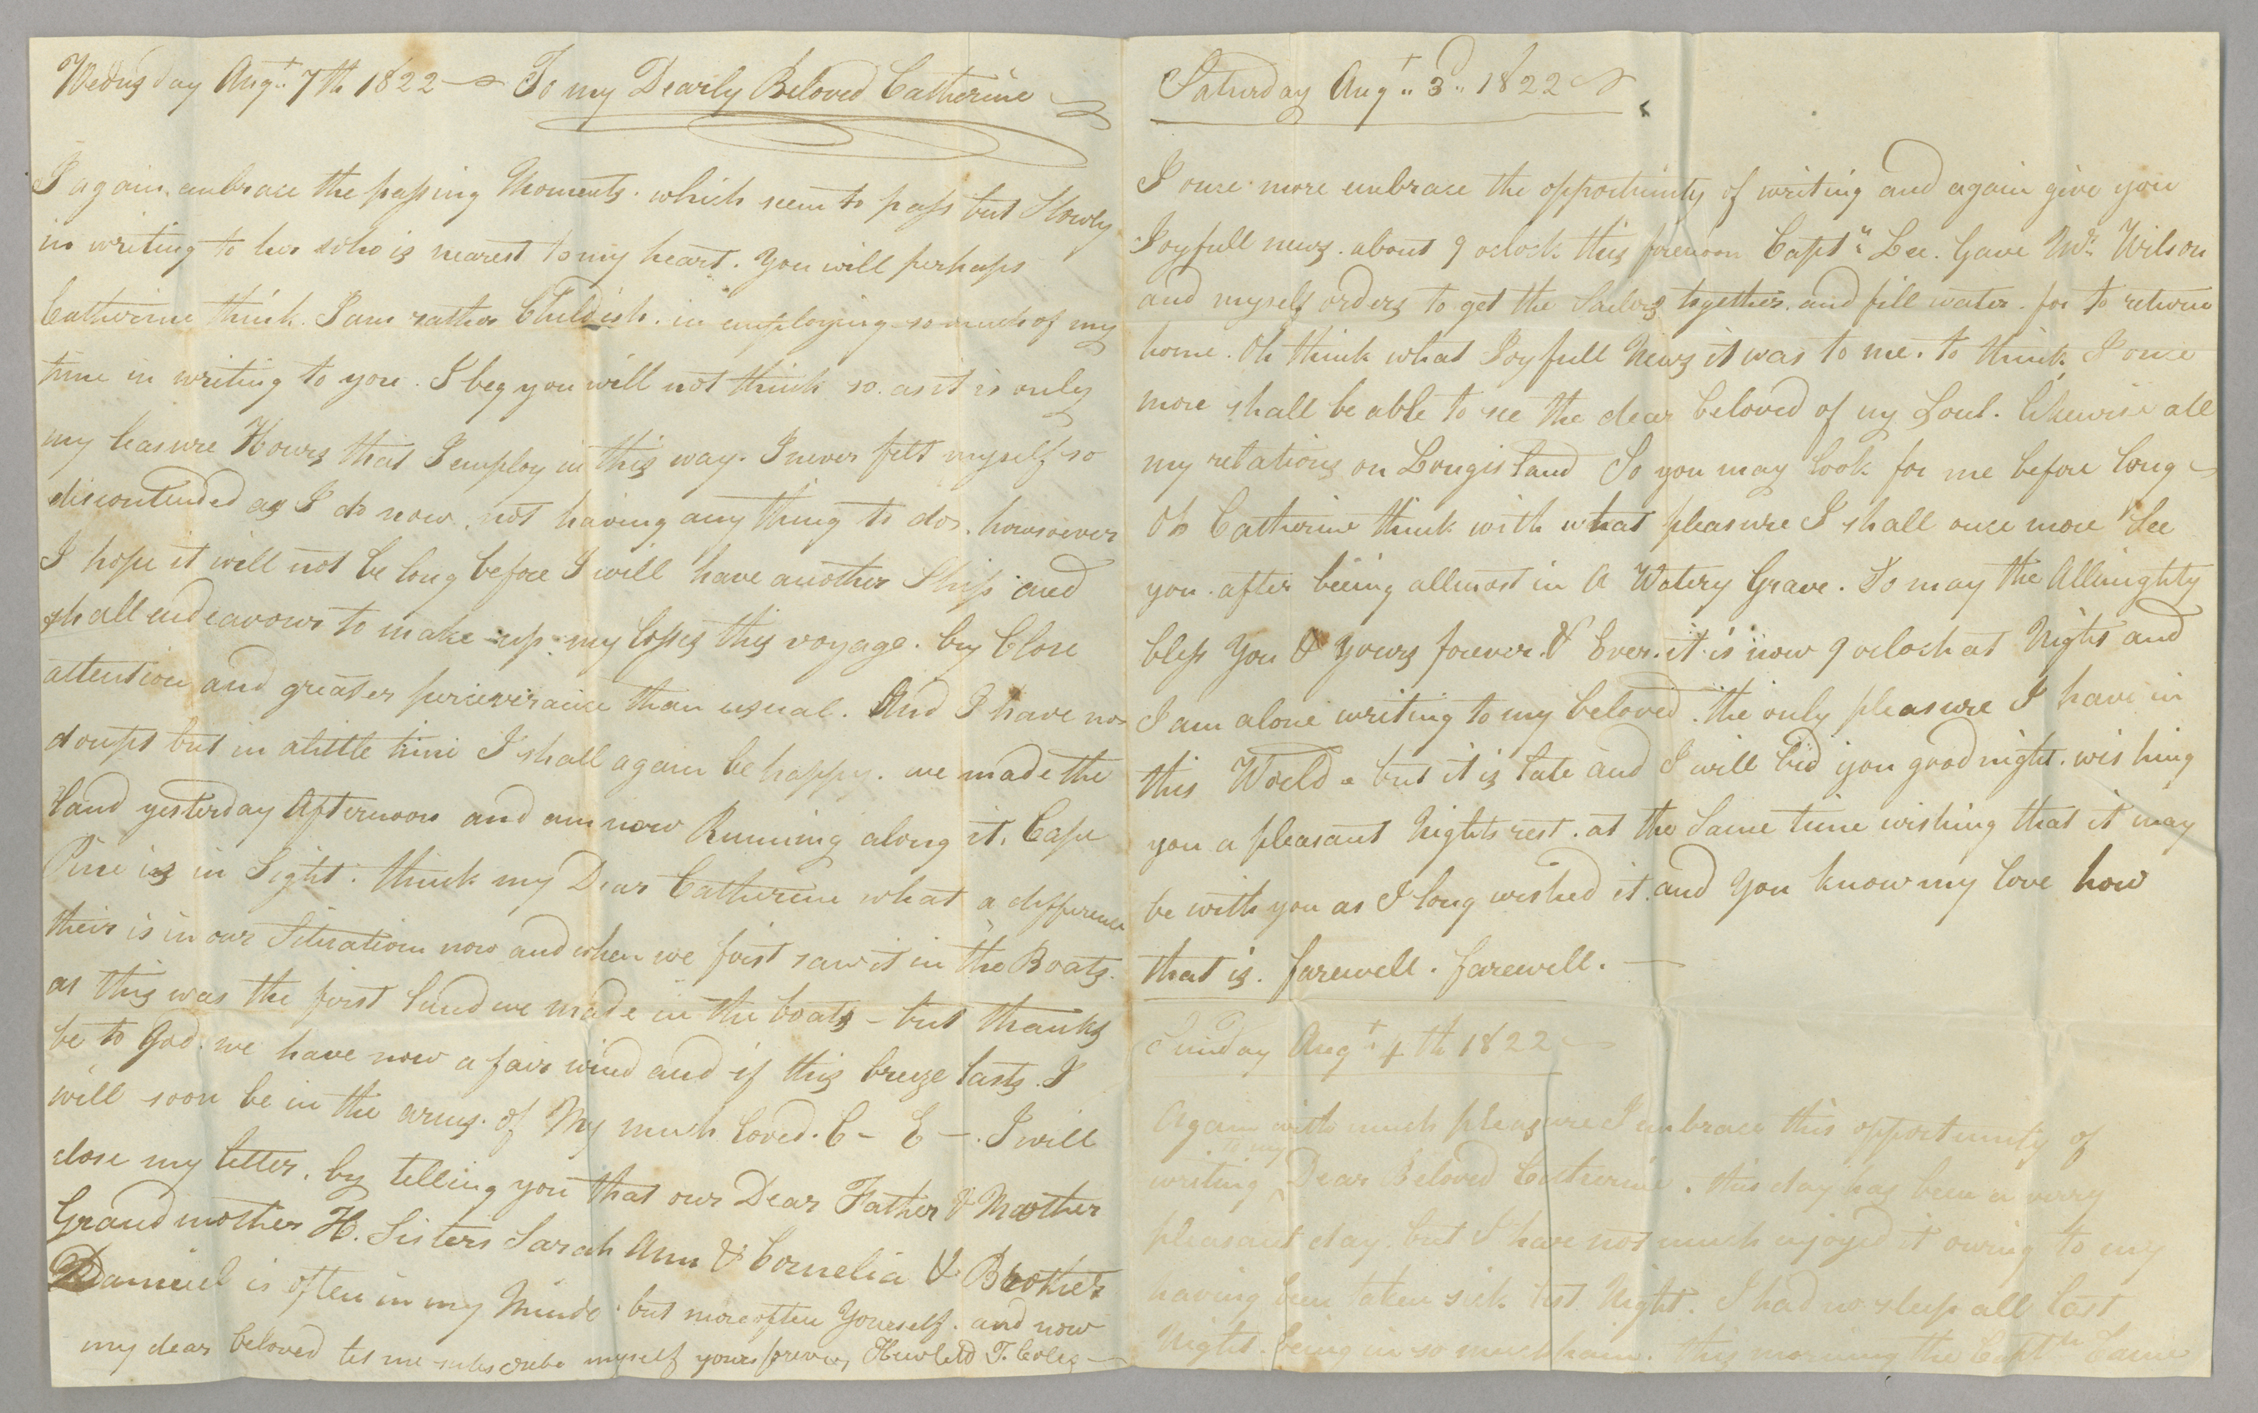 Letter, Hewlett T[ownsend] Coles, St. John's, Newfoundland, to "My Dear Catherine," [Catherine Van Suydam Coles], n.p., Pages 2-3